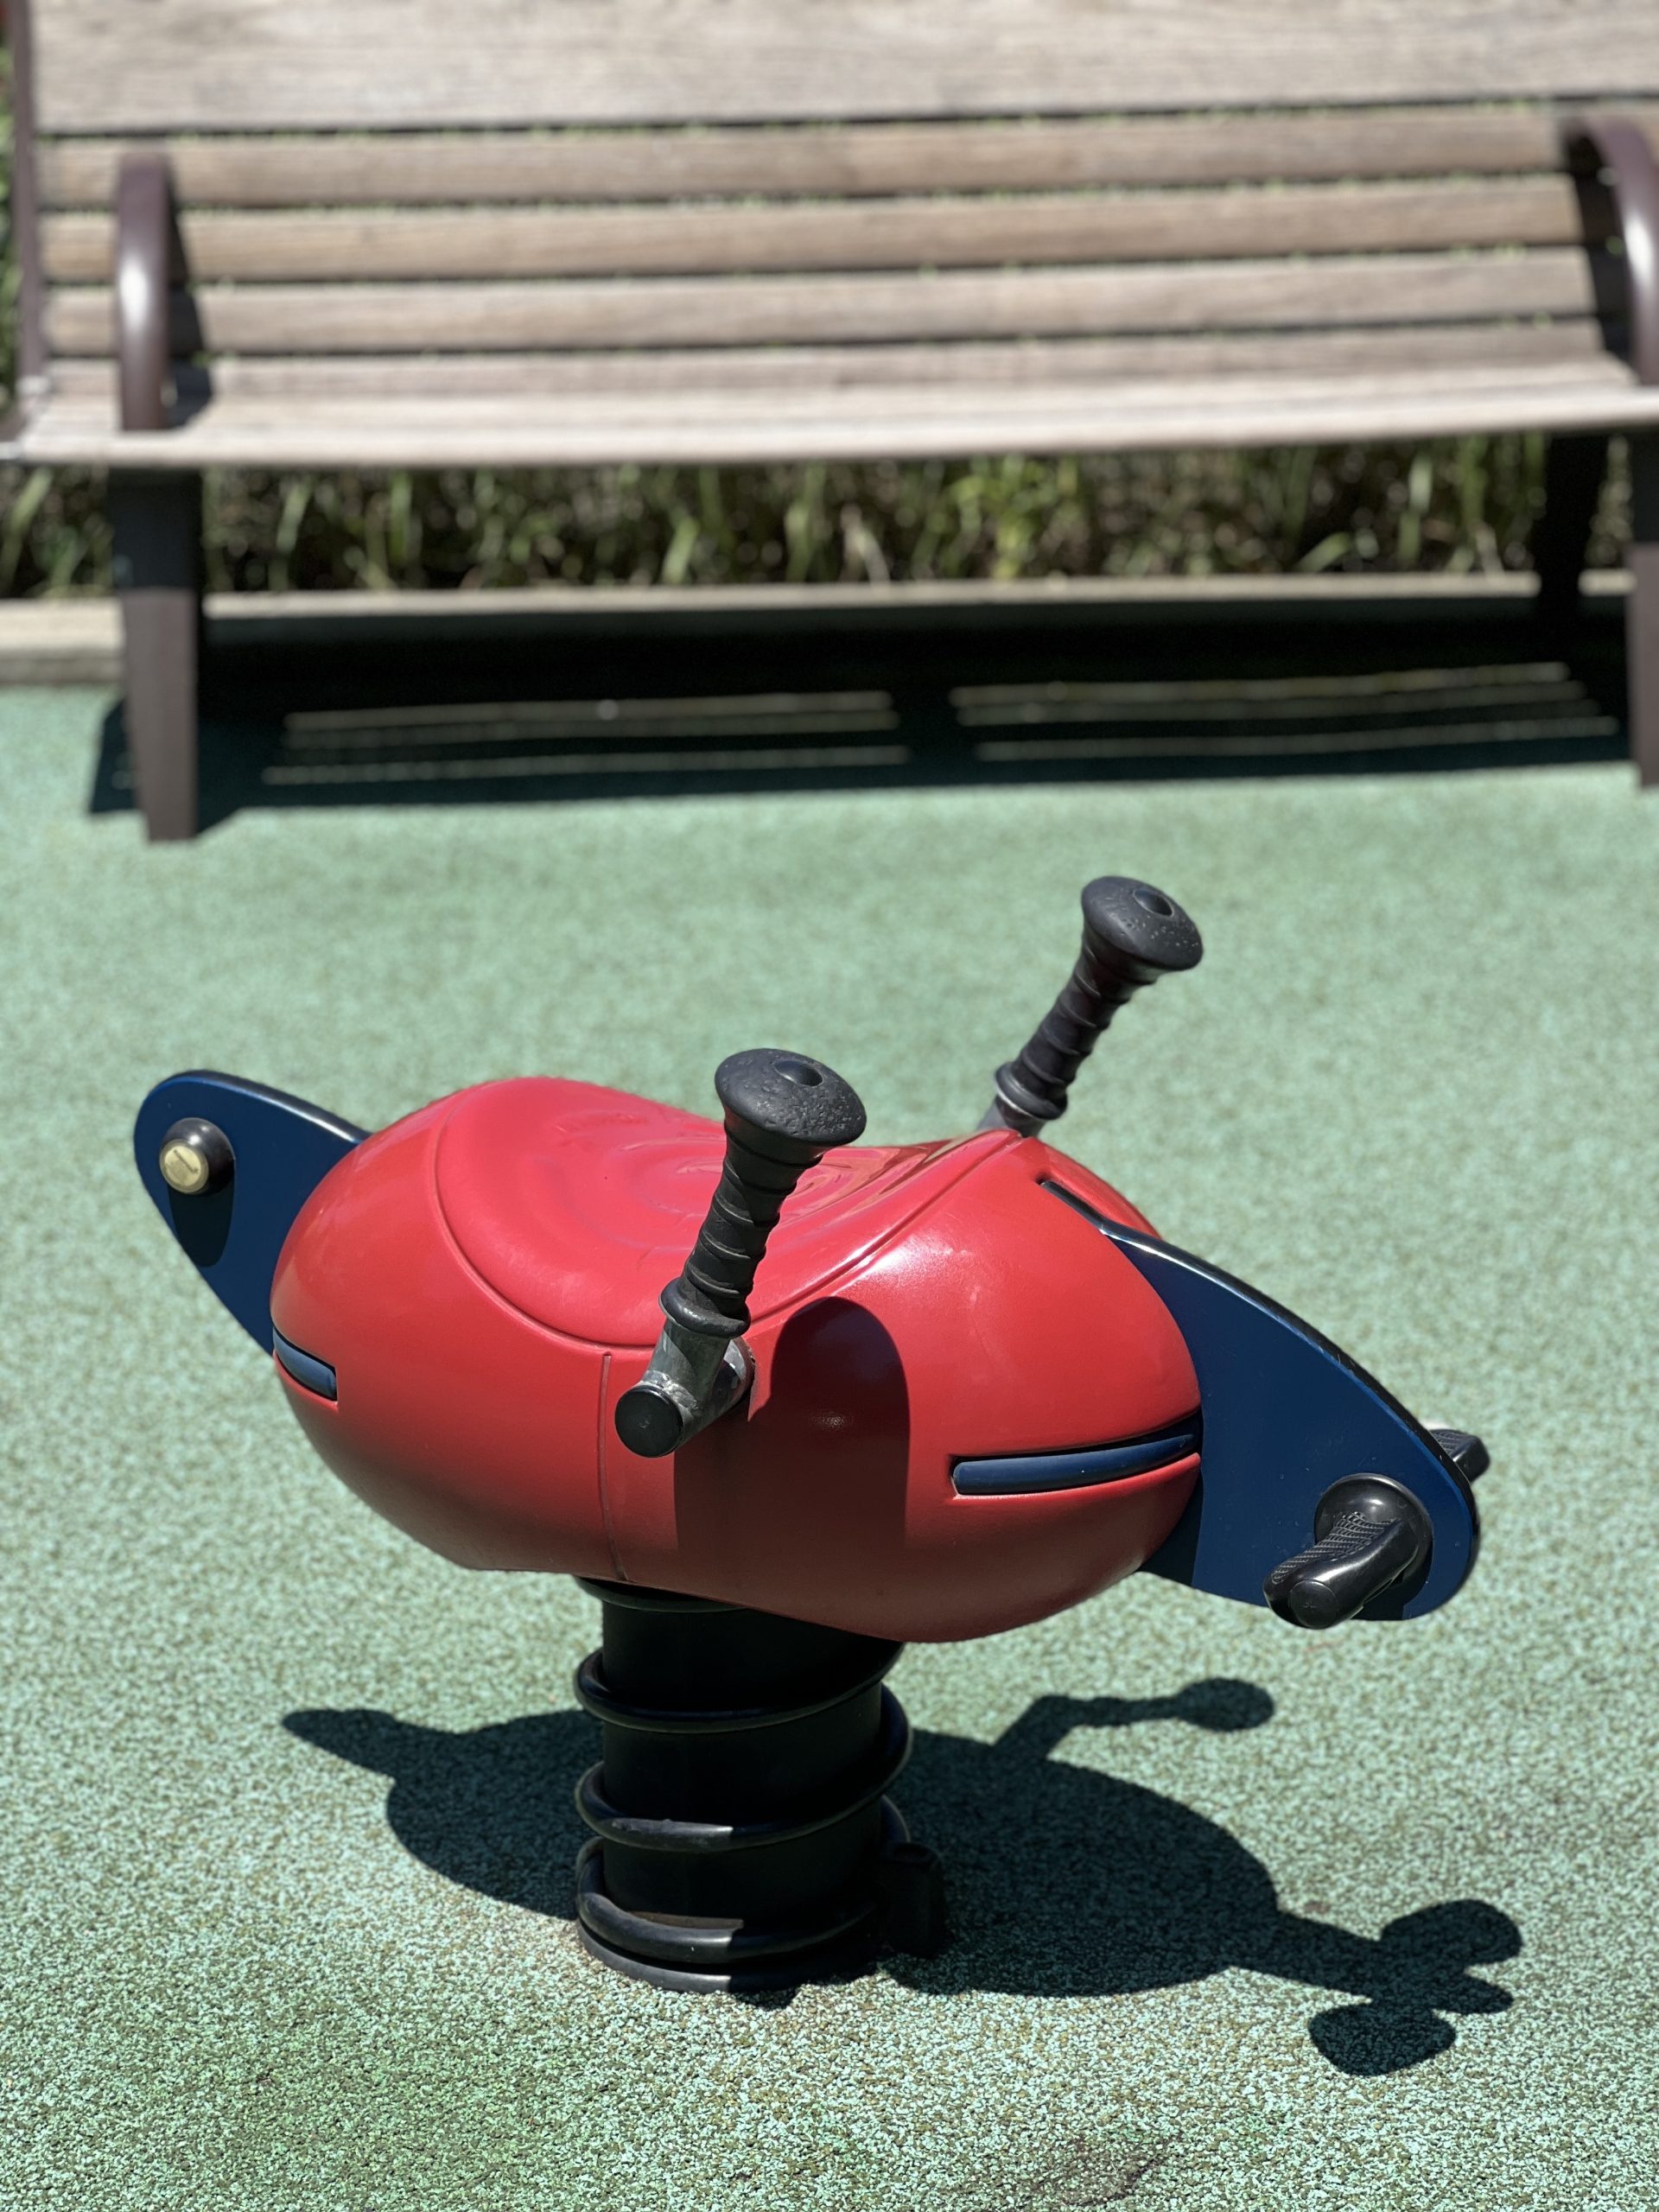 FEATURES - Ride on toy red AT Newport Green Park Playground in Jersey City NJ